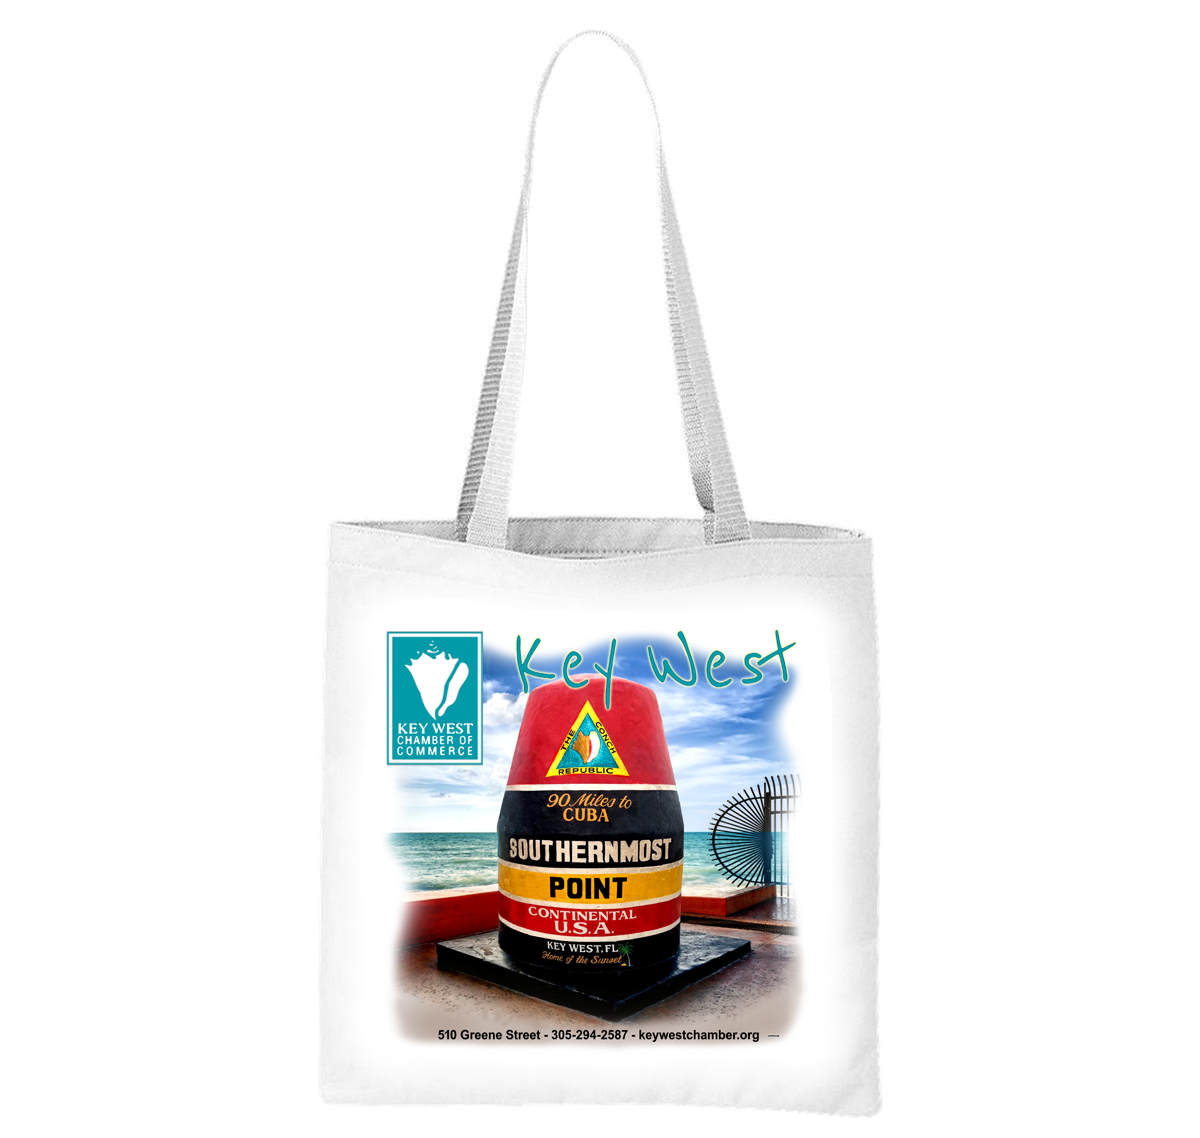 Key West Chamber of Commerce Southernmost Point Liberty Bag